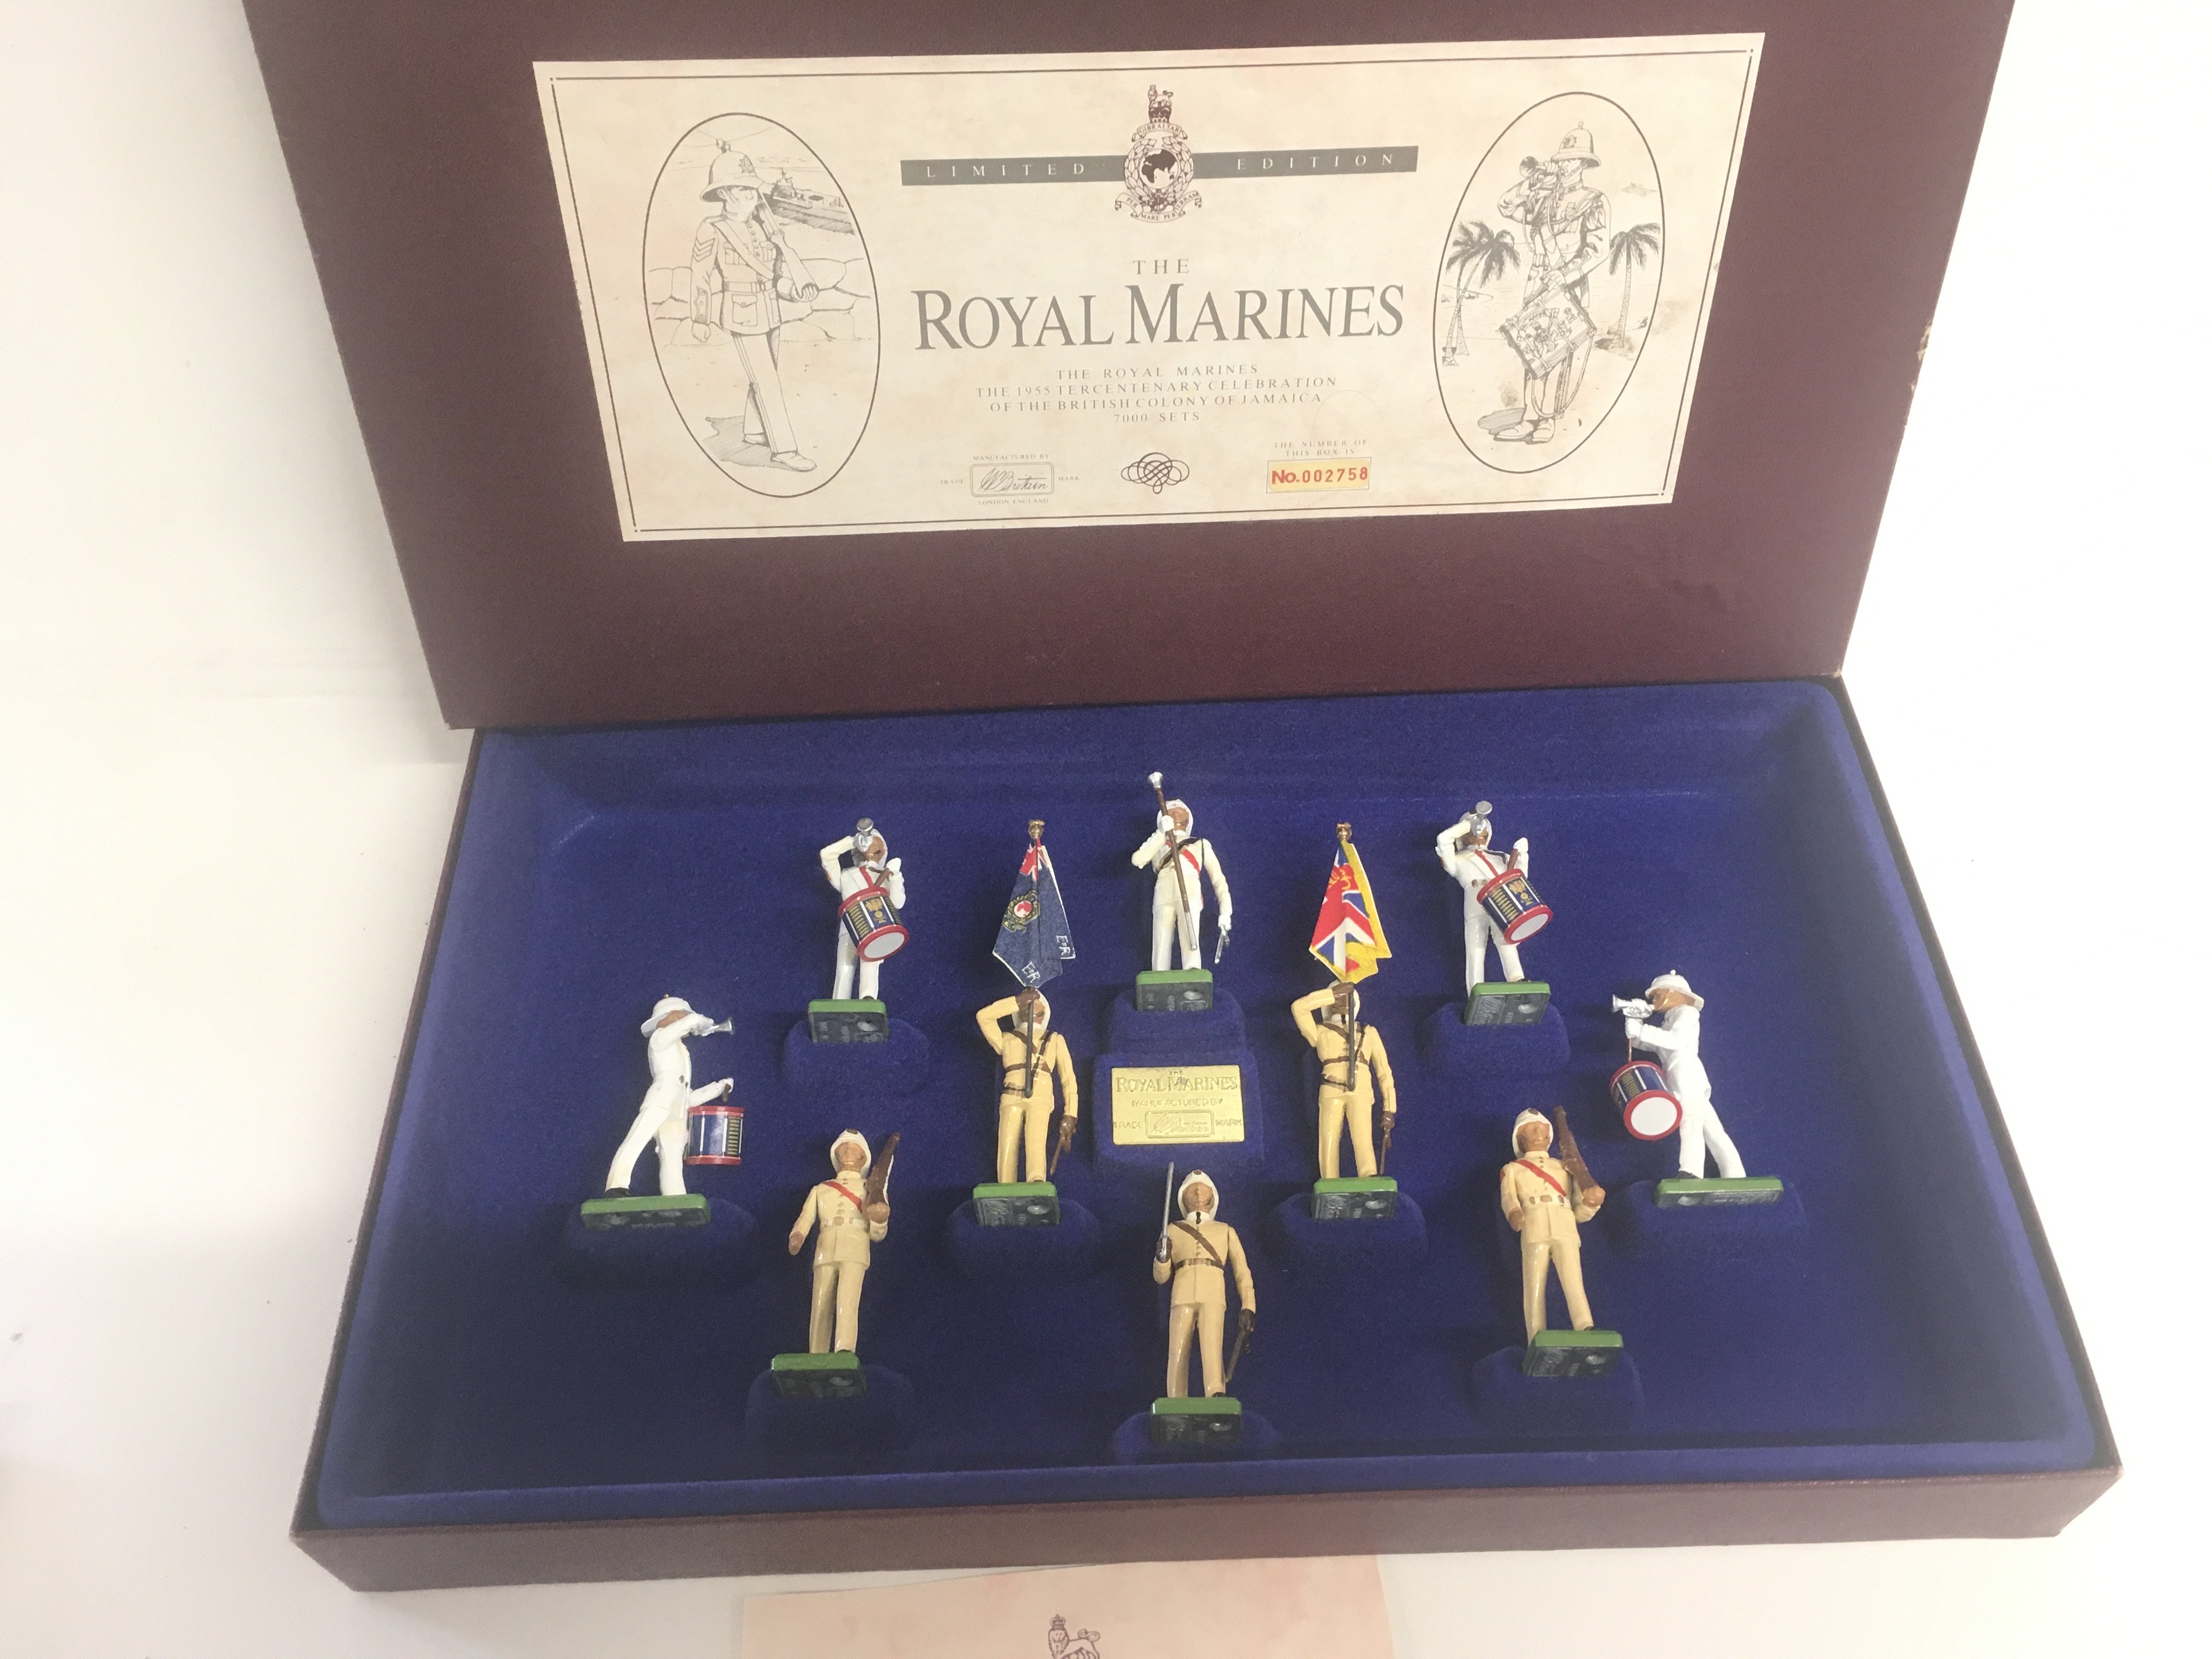 A Boxed Britainâ€™s Limited Edition The Royal Mari